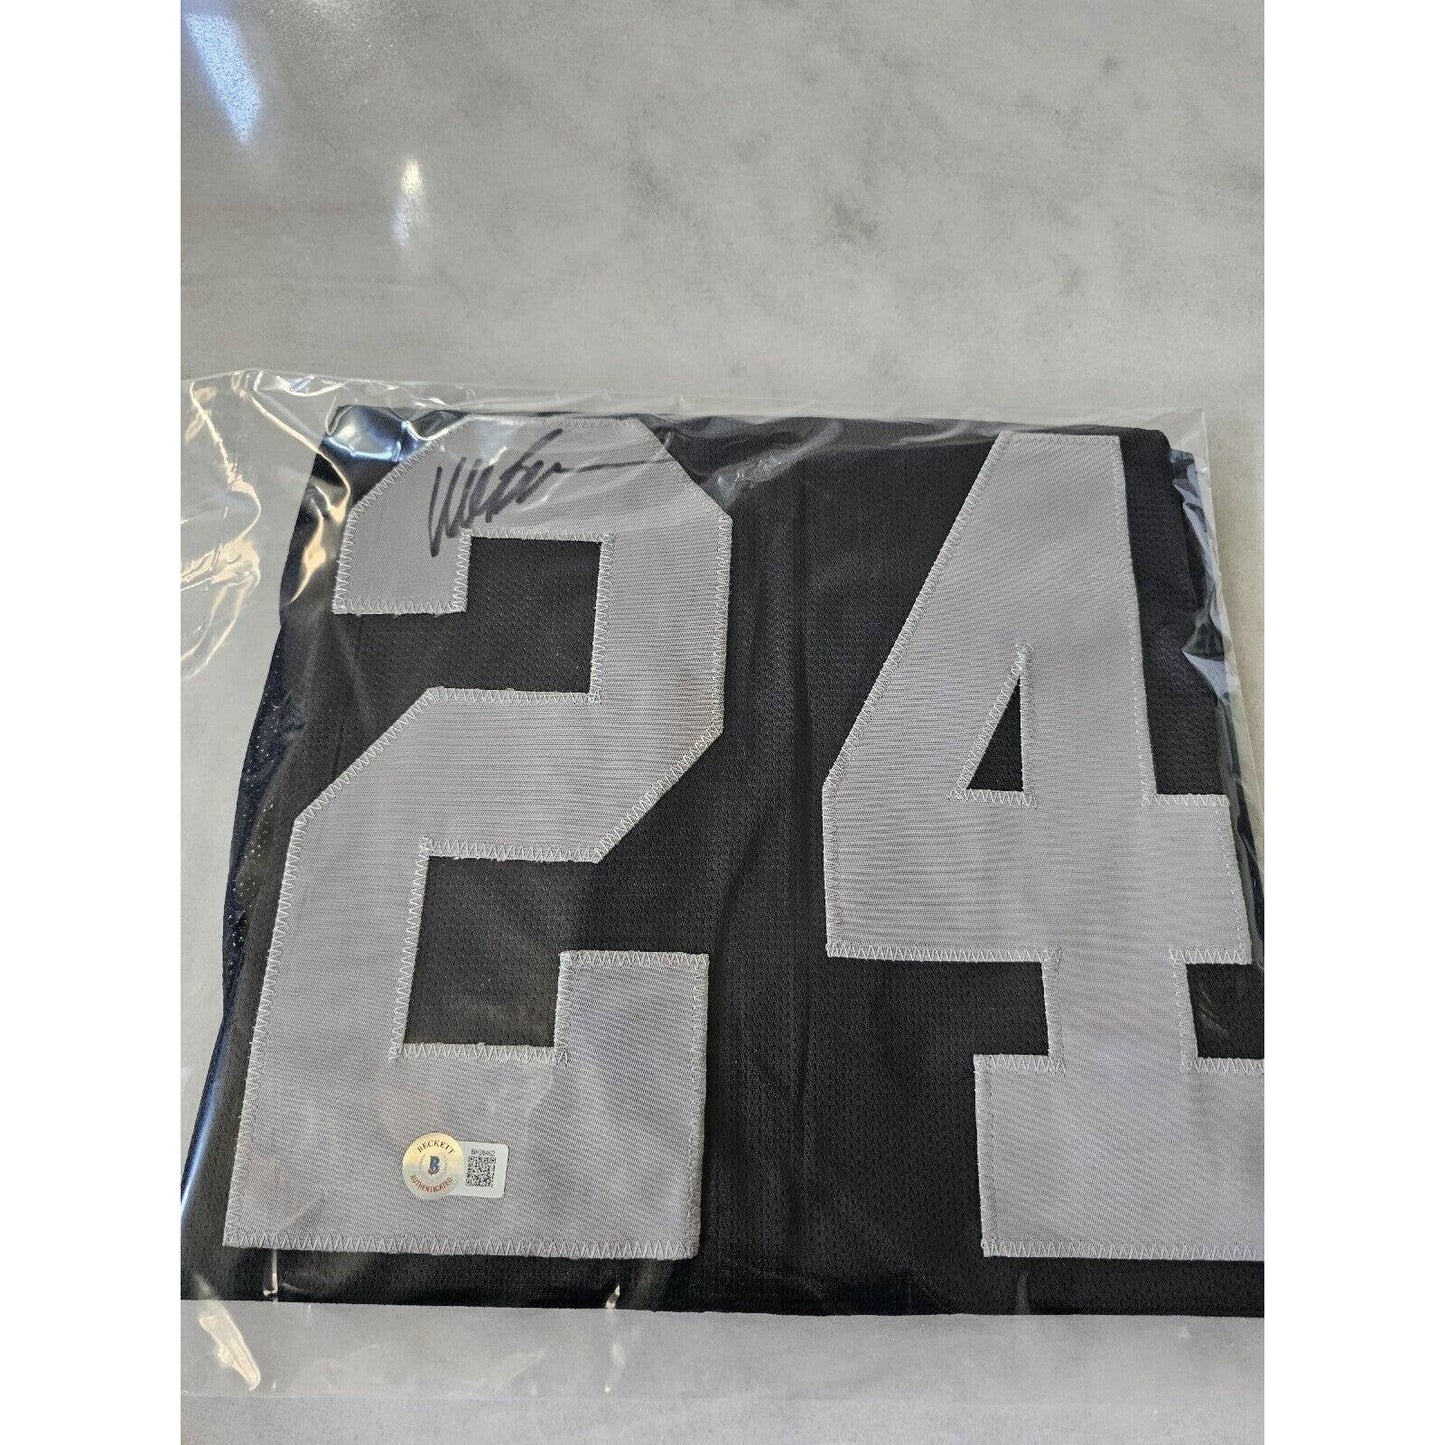 Willie Brown Autographed/Signed Jersey Beckett COA Los Angeles Raiders Las Vegas